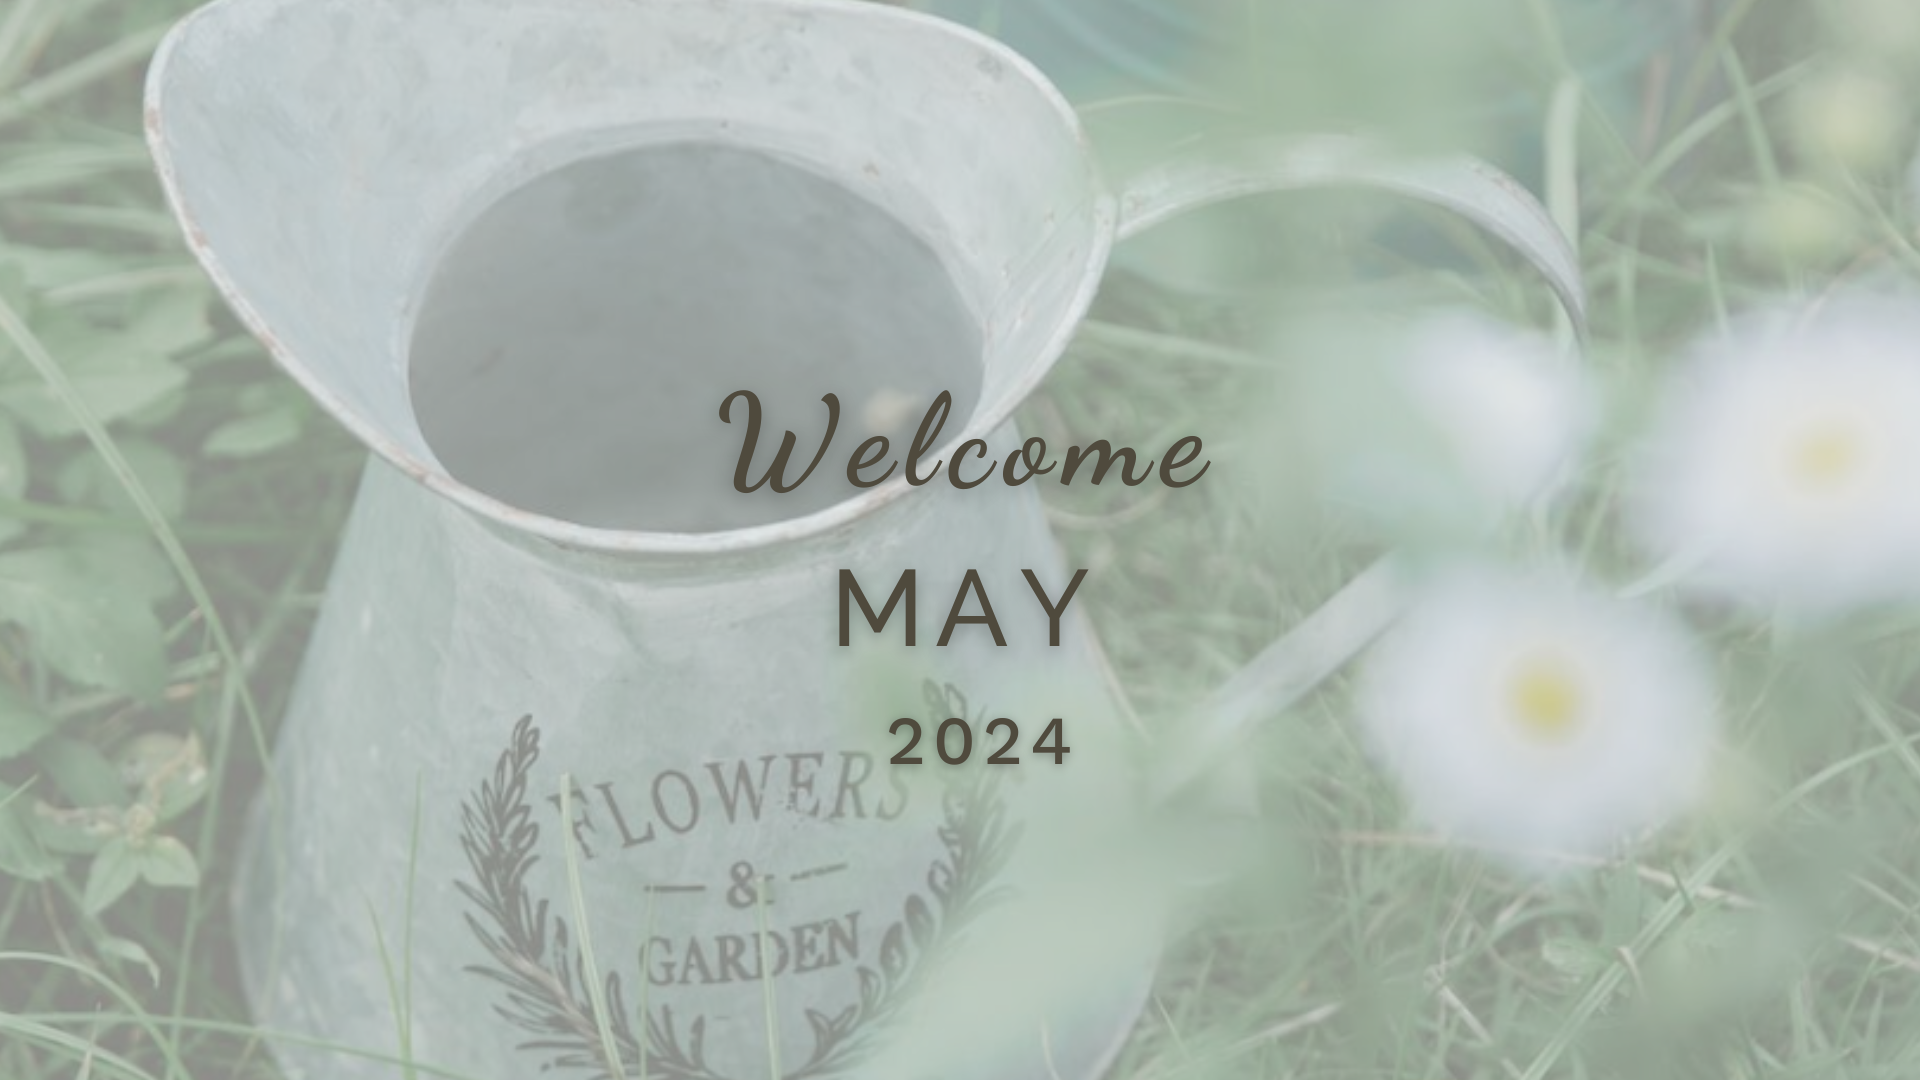 Welcome May (Almanac 2024) by Sue Cartwright, Spiral Leaf